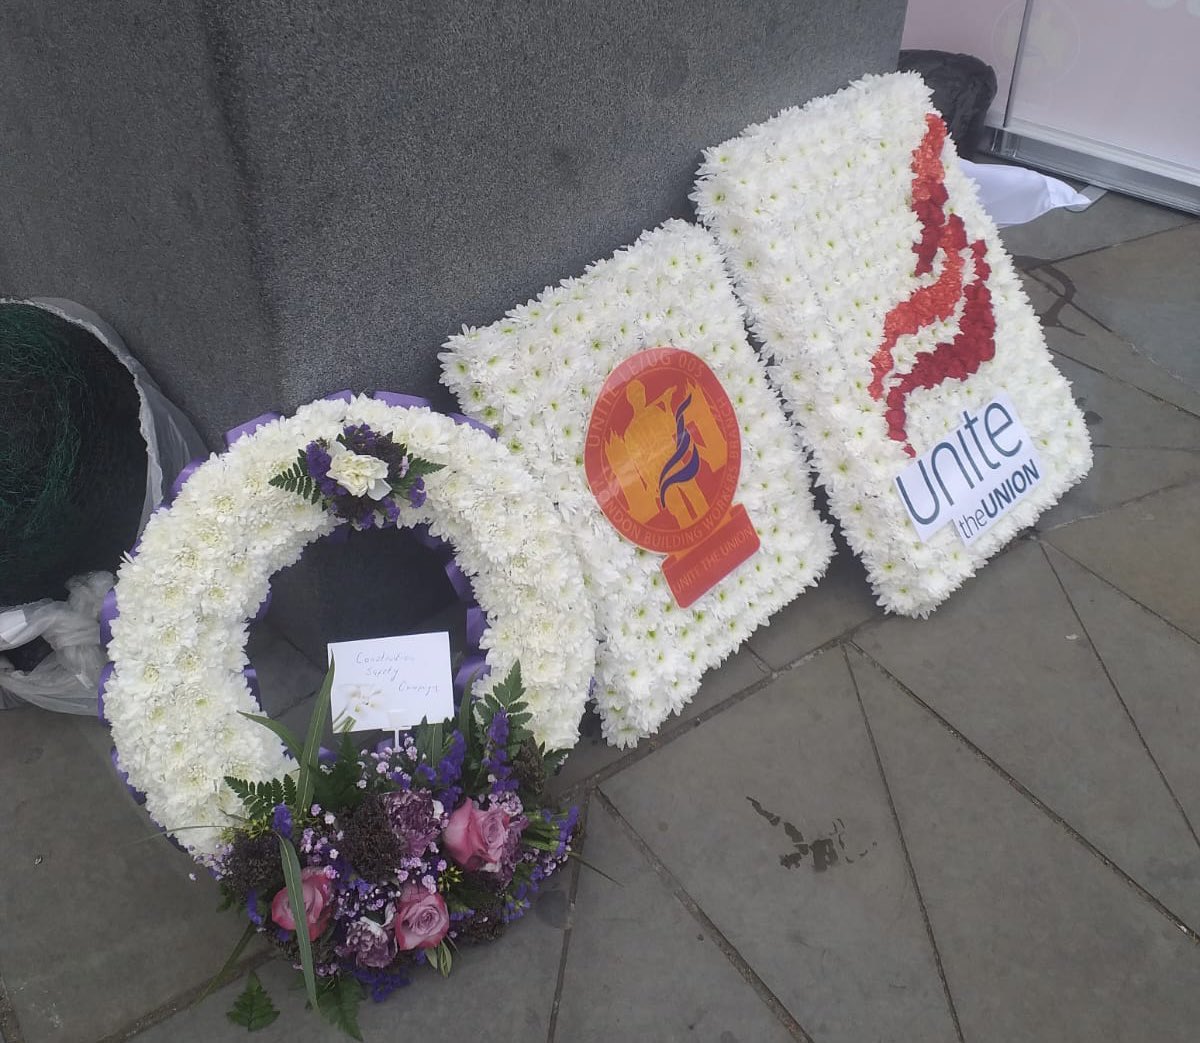 On #InternationalWorkersMemorialDay, we remember those who have lost their lives in the workplace and renew our commitment to fighting for fair pay, conditions and health and safety in every country.

Join a union, organise and build power in your community. #IWMD2022